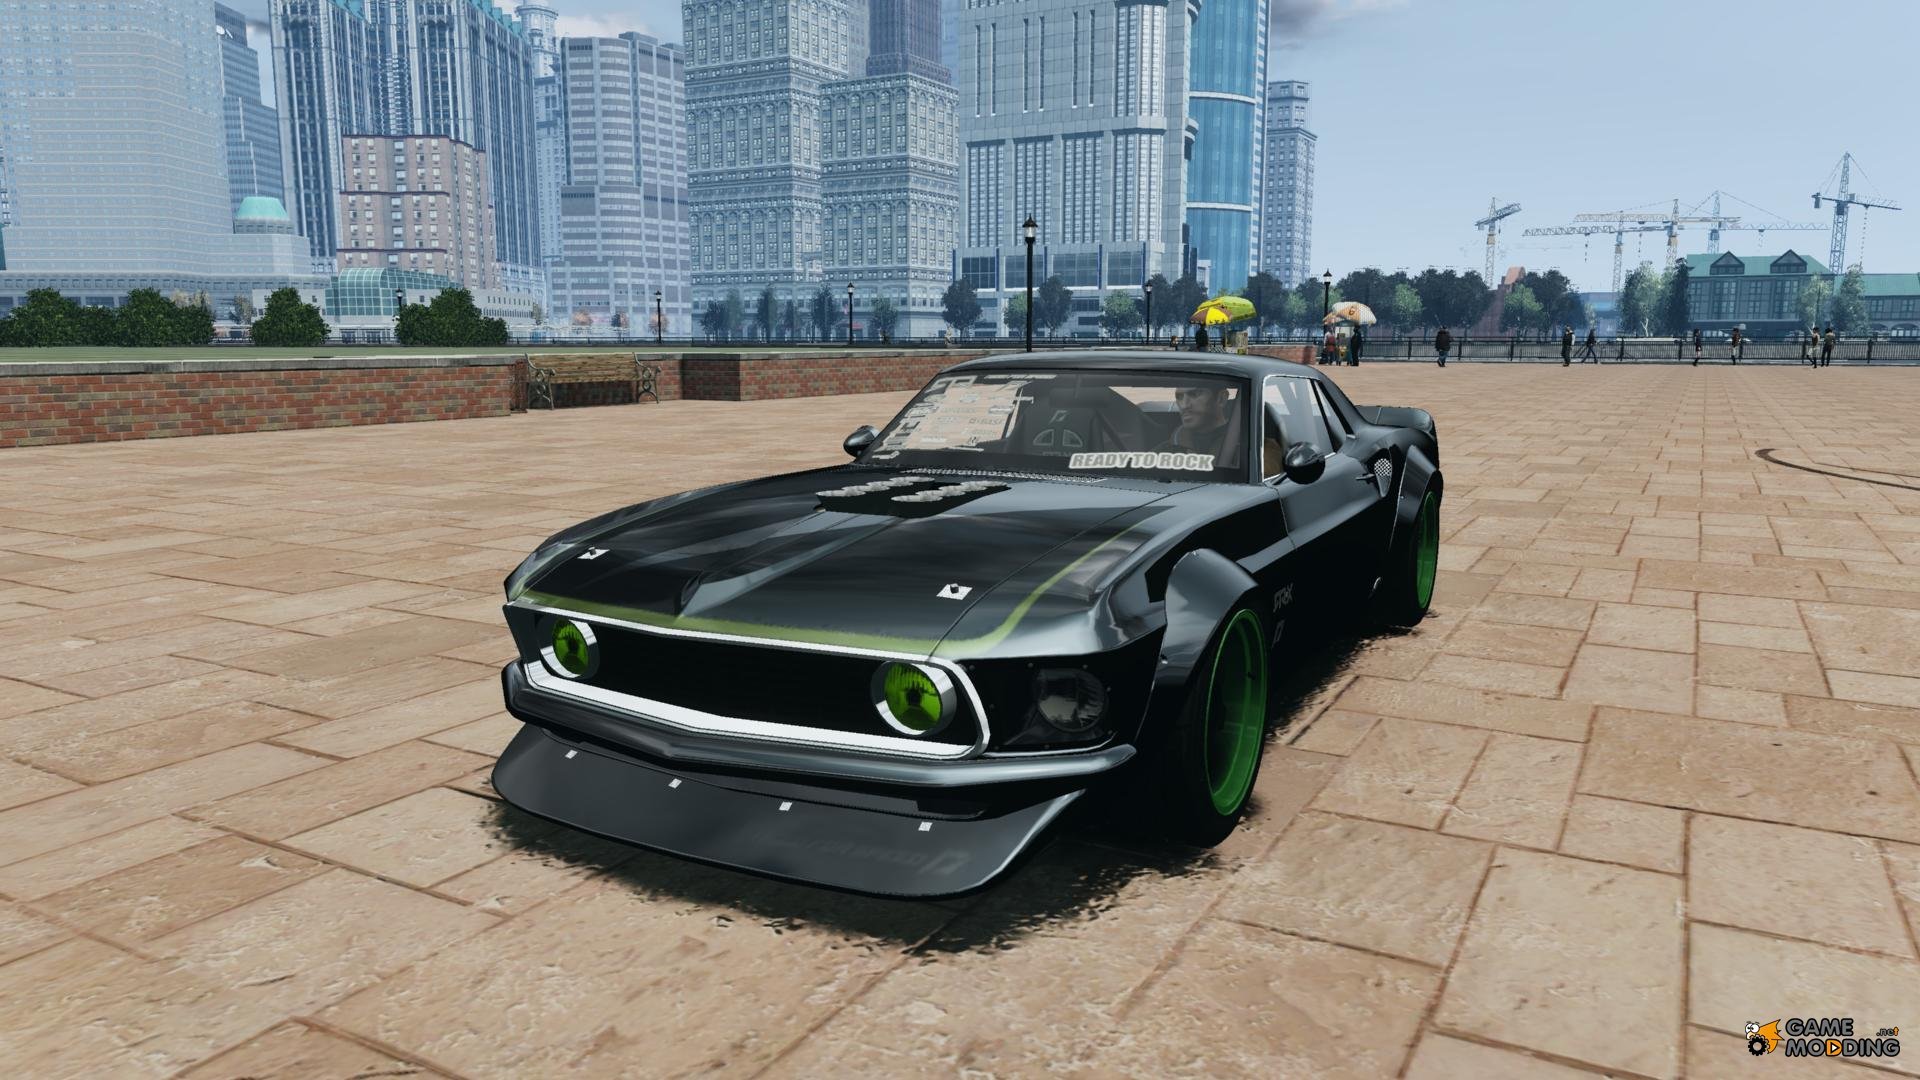 1969, Ford, Mustang, Rtr x, Drift, Race, Racing, Hot, Rod, Rods, Muscle, Classic, Need, Speed, Rtr, Gta, Grand, Theft, Auto Wallpaper